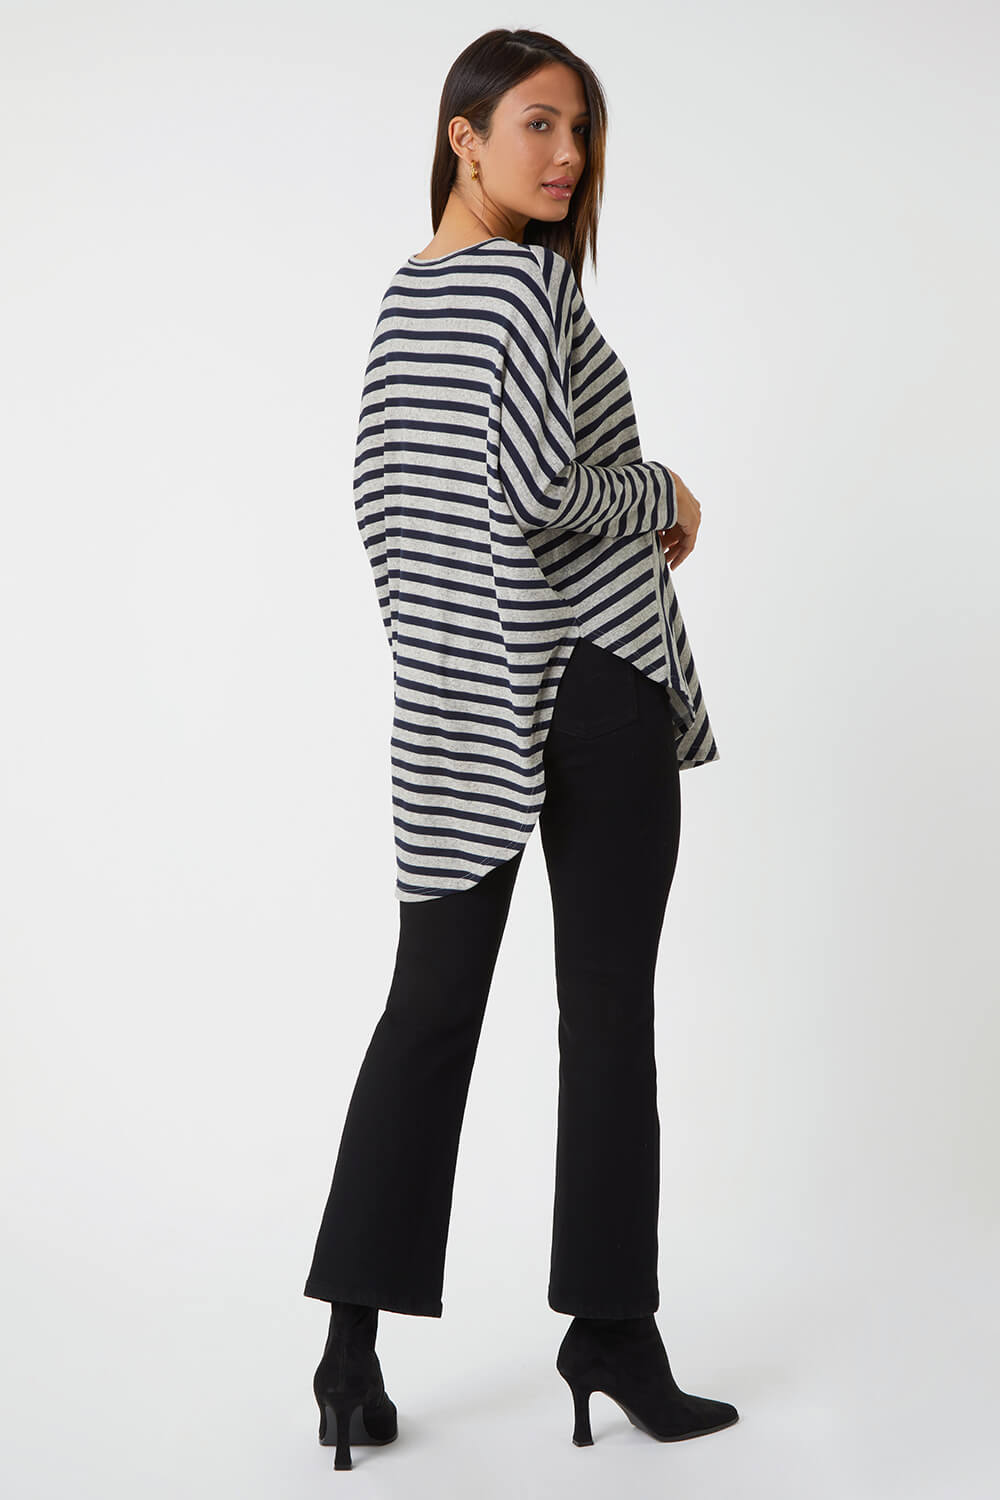 Grey Contrast Stripe Stretch Jersey Top, Image 3 of 5